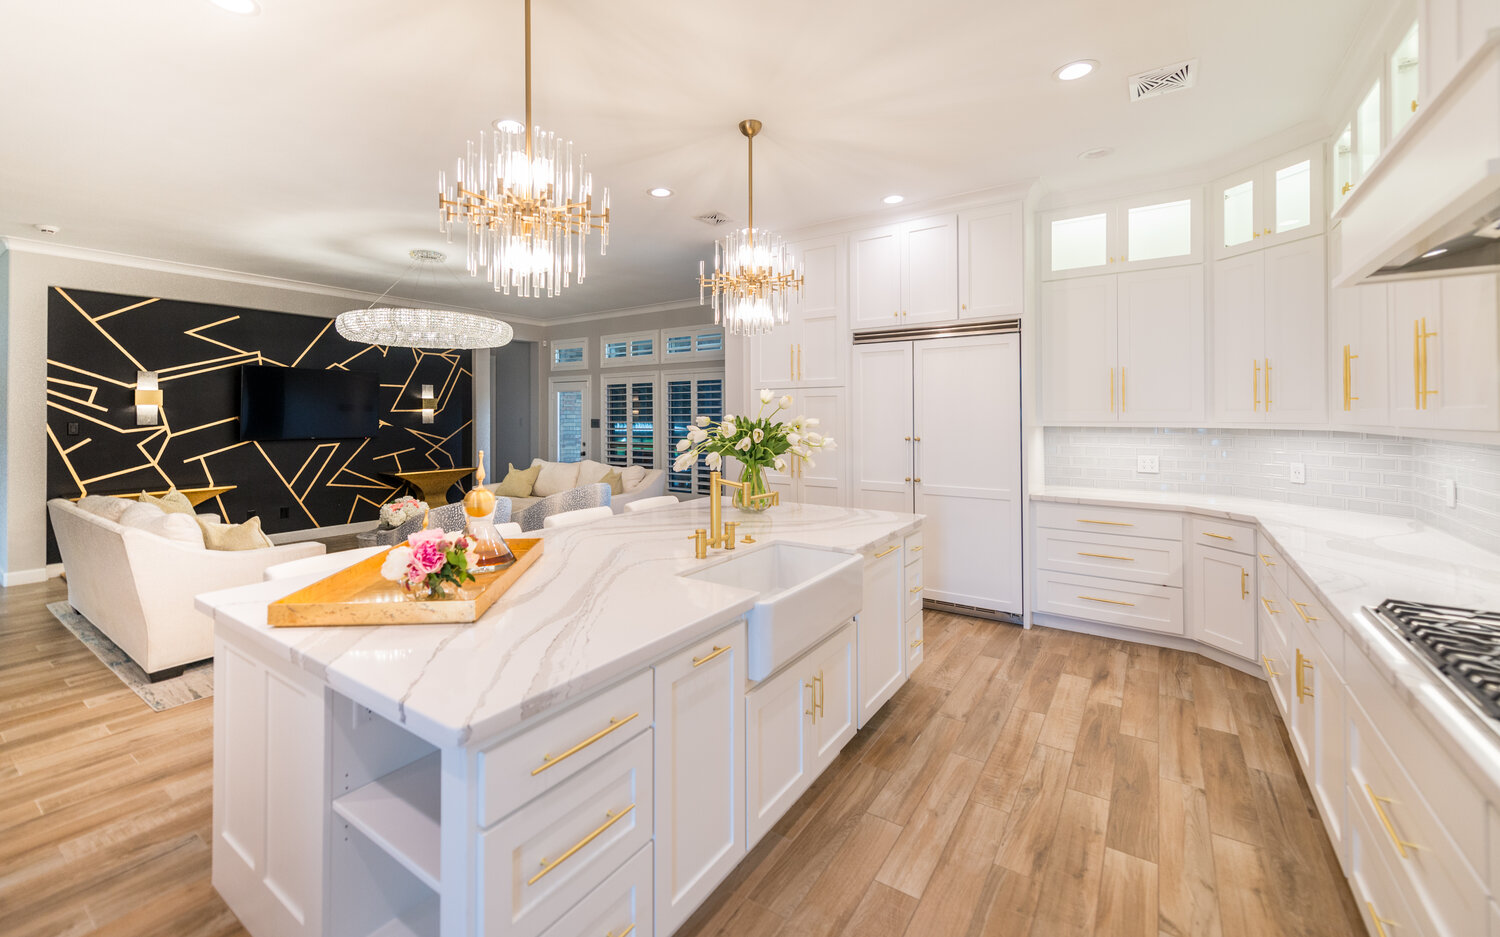 Missy Stewart Creates Homes Where Memories Will Be Made